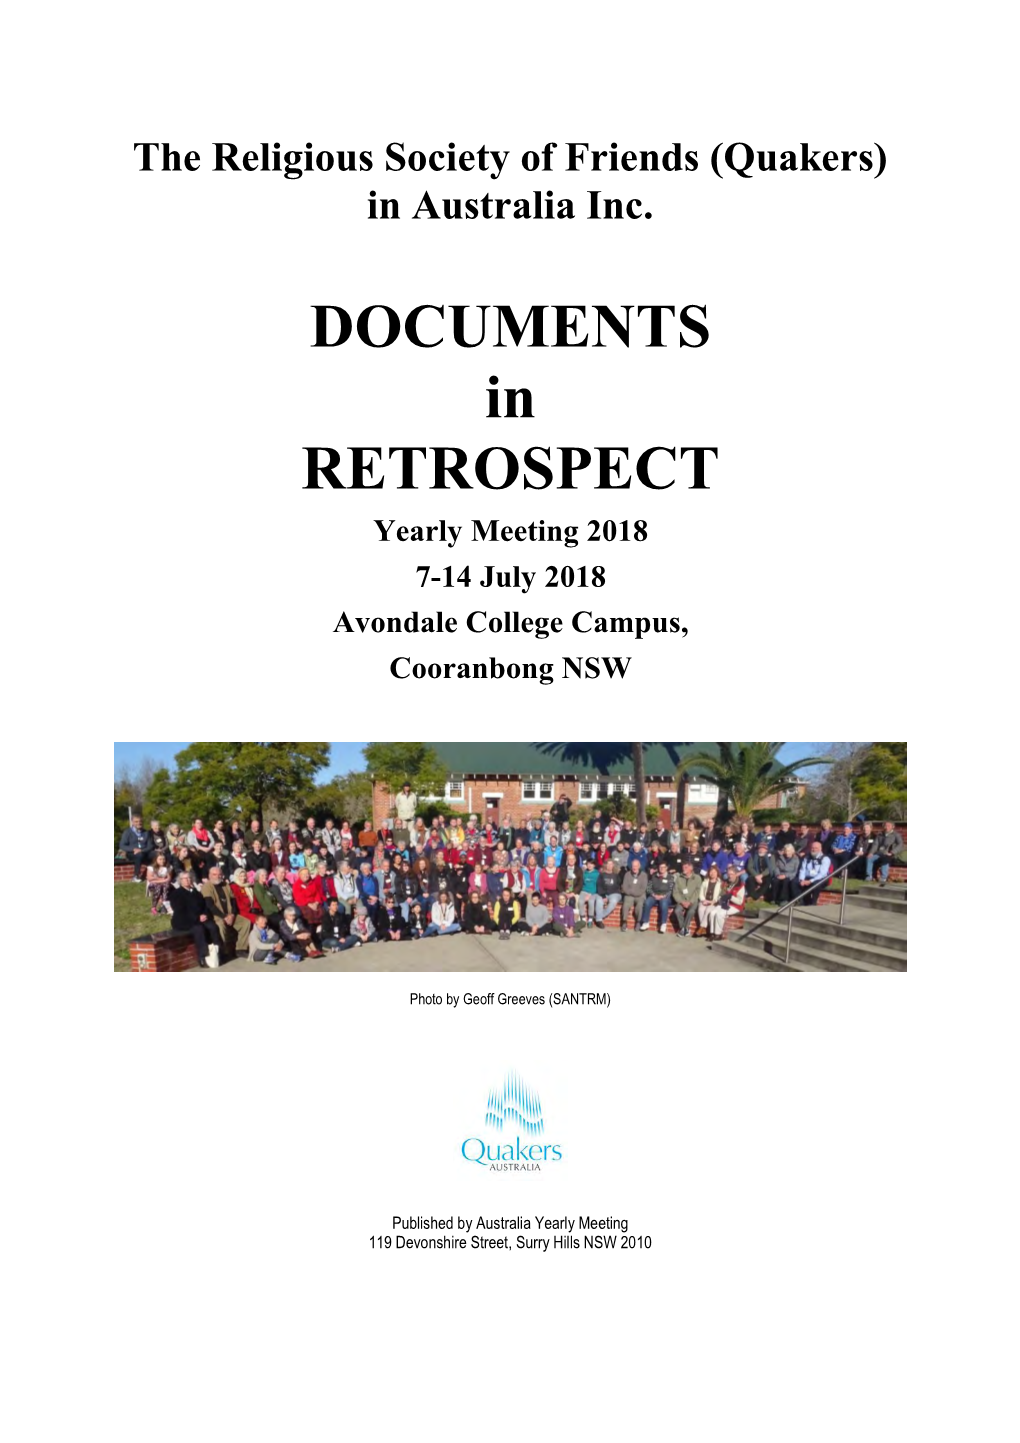 DOCUMENTS in RETROSPECT Yearly Meeting 2018 7-14 July 2018 Avondale College Campus, Cooranbong NSW